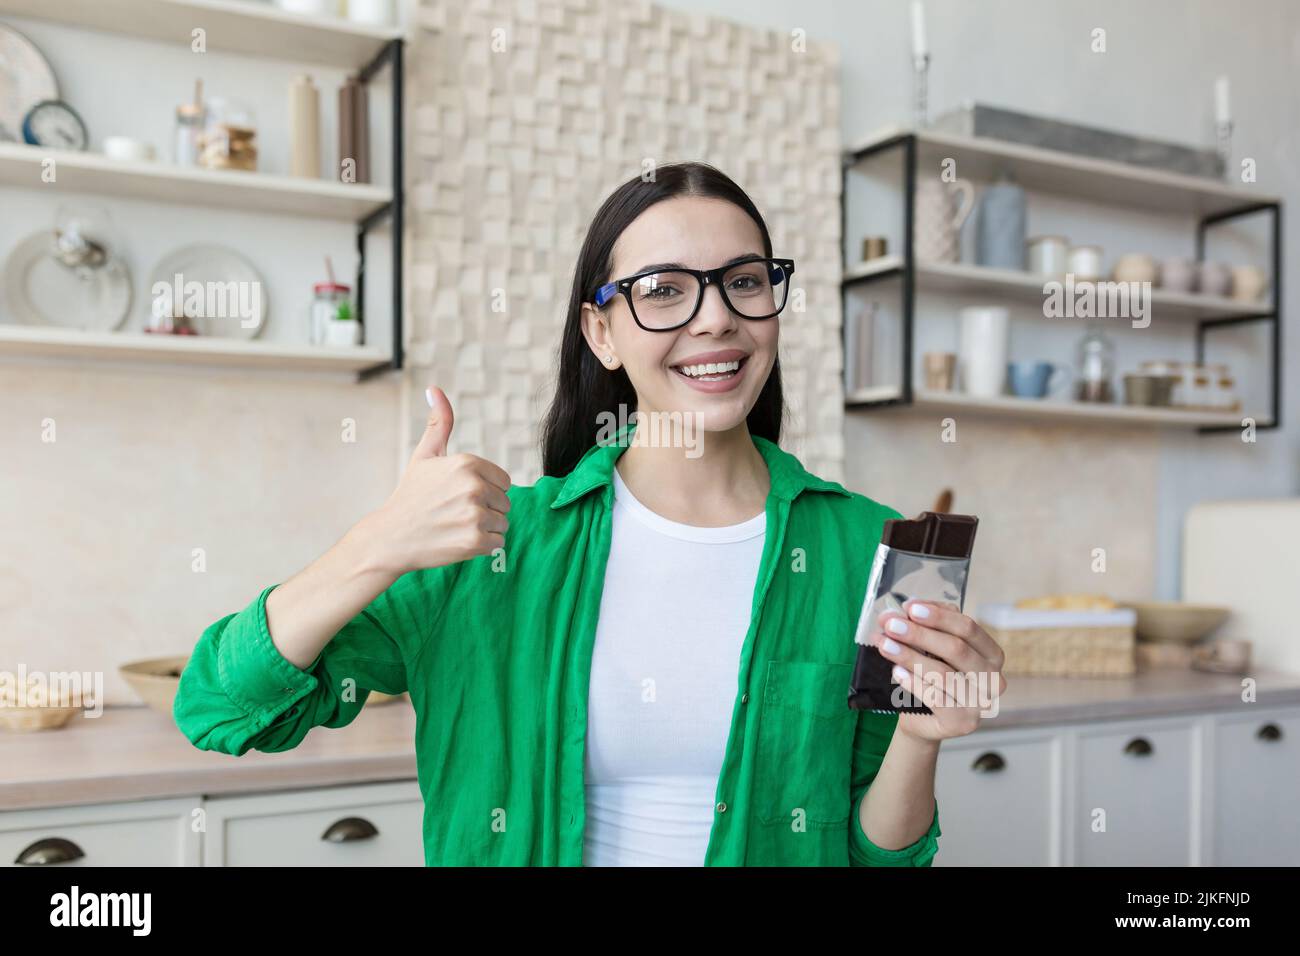 Young beautiful woman teenager holding chocolate bar in hands in glasses and green shirt, looking at camera smiling, recommending holding thumb up Stock Photo